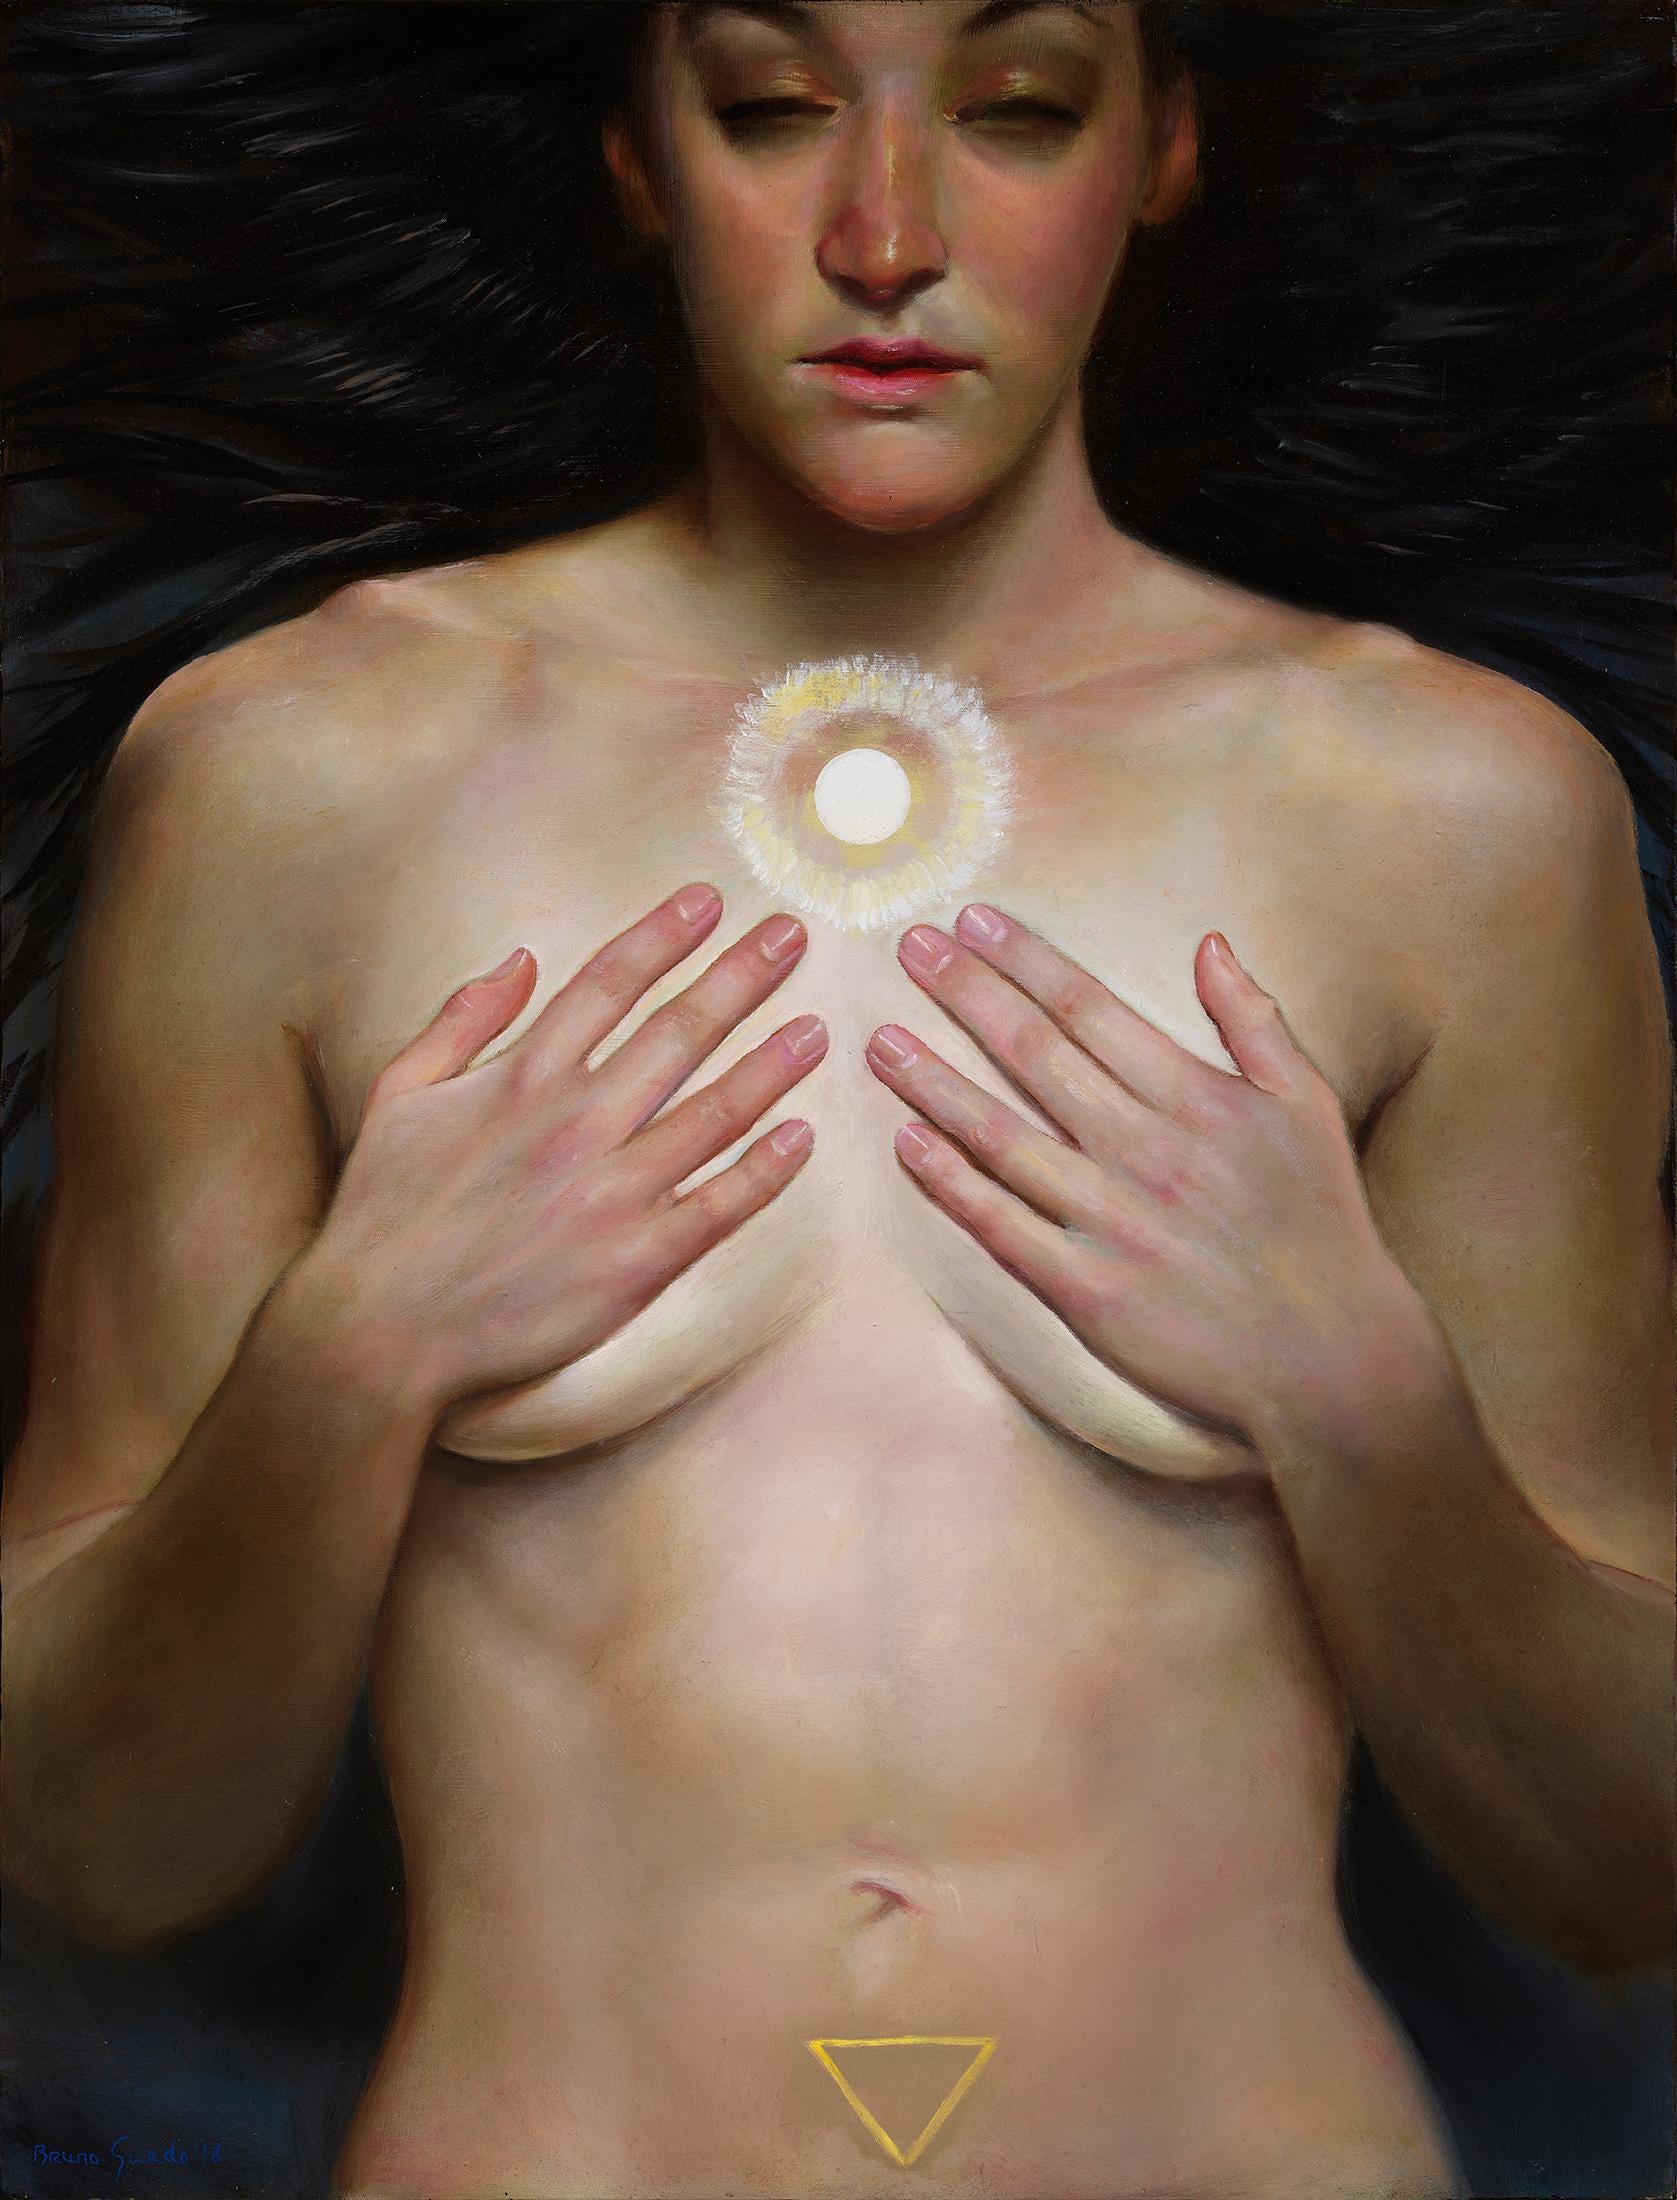 The Oracle, Nude Female with Hands Covering Her Breasts, Long Dark Hair